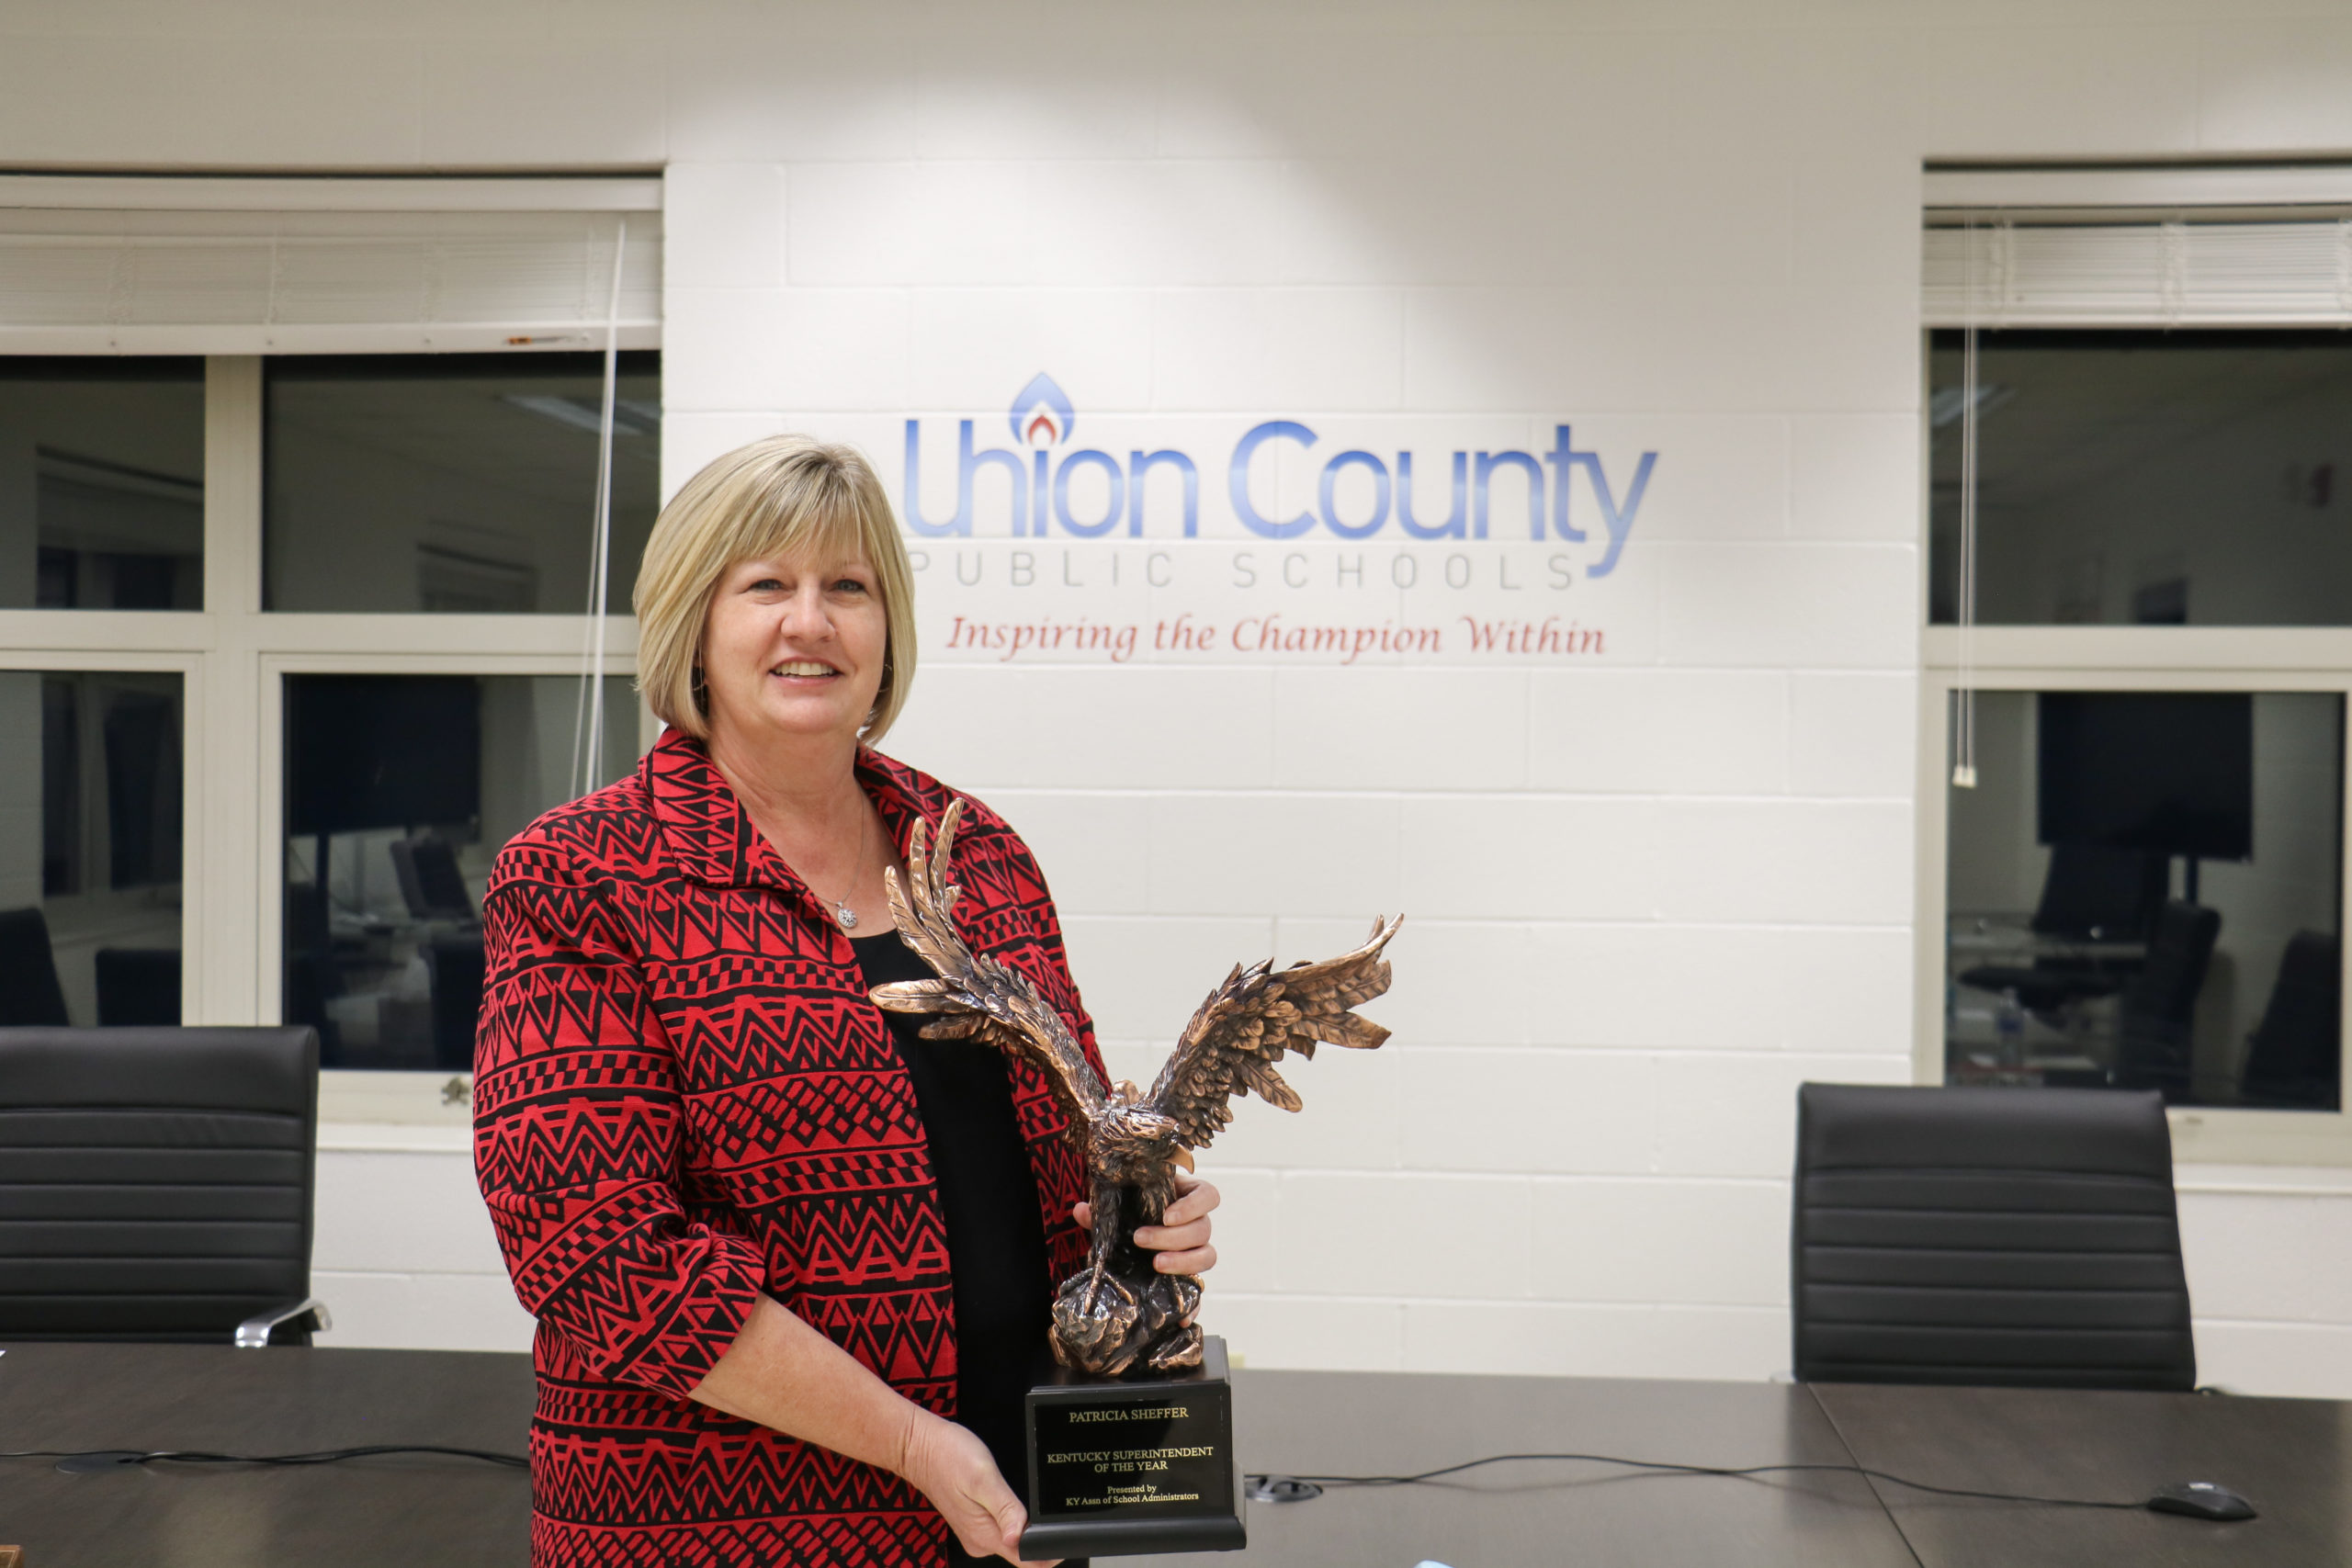 Union County Public Schools Superintendent Patricia Sheffer holds a trophy shaped like an eagle.